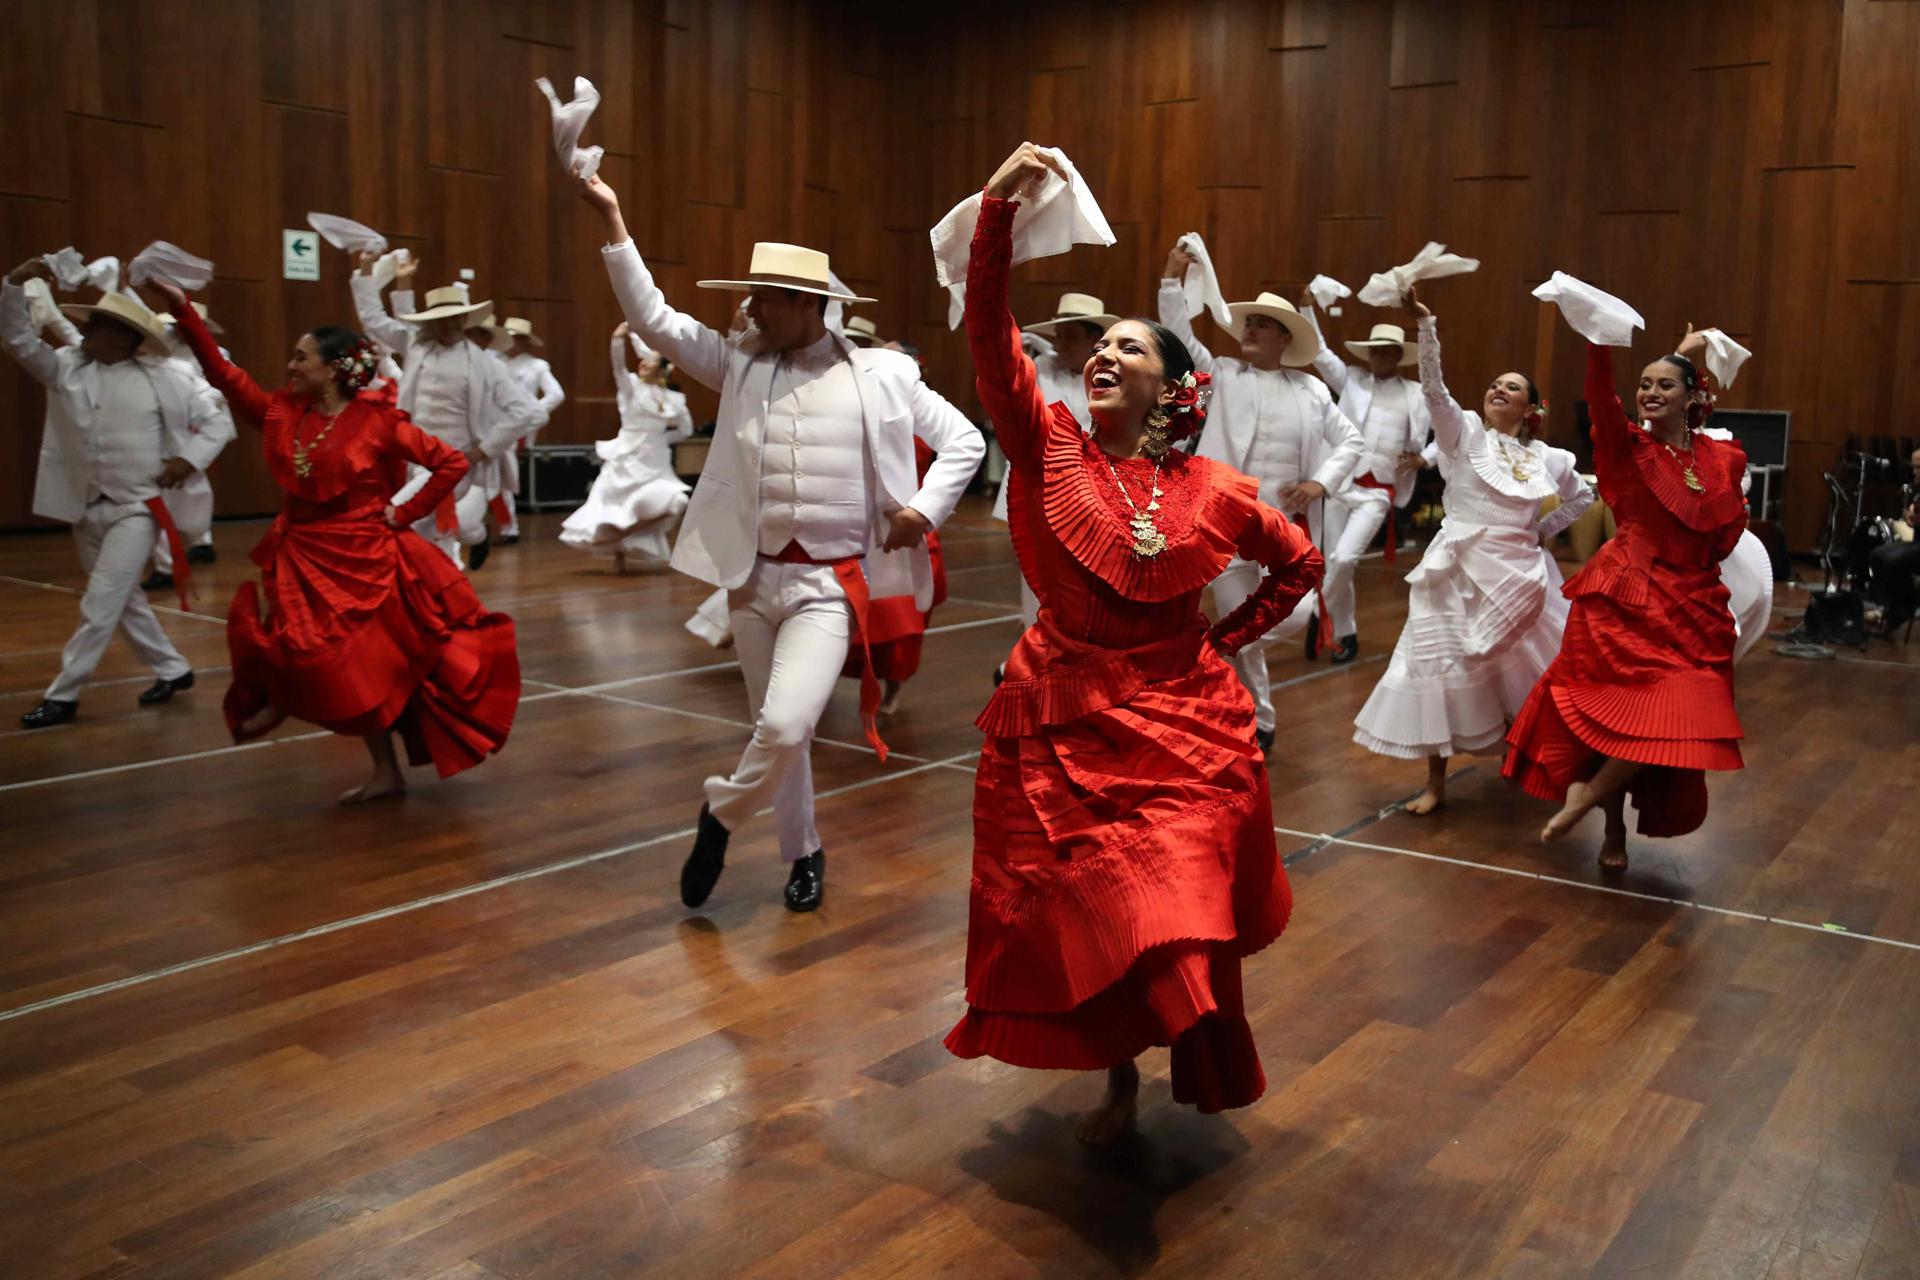 Members of Peru's National Folkloric Ballet on 10 July 2023 rehearse the country's famed marinero partner dance, which is part of the "Retablo de Fiestas Patrias" spectacle that will be performed between 21 July 2023 and 30 July 2023 at the Grand National Theater in Lima, Peru. EFE/Paolo Aguilar
